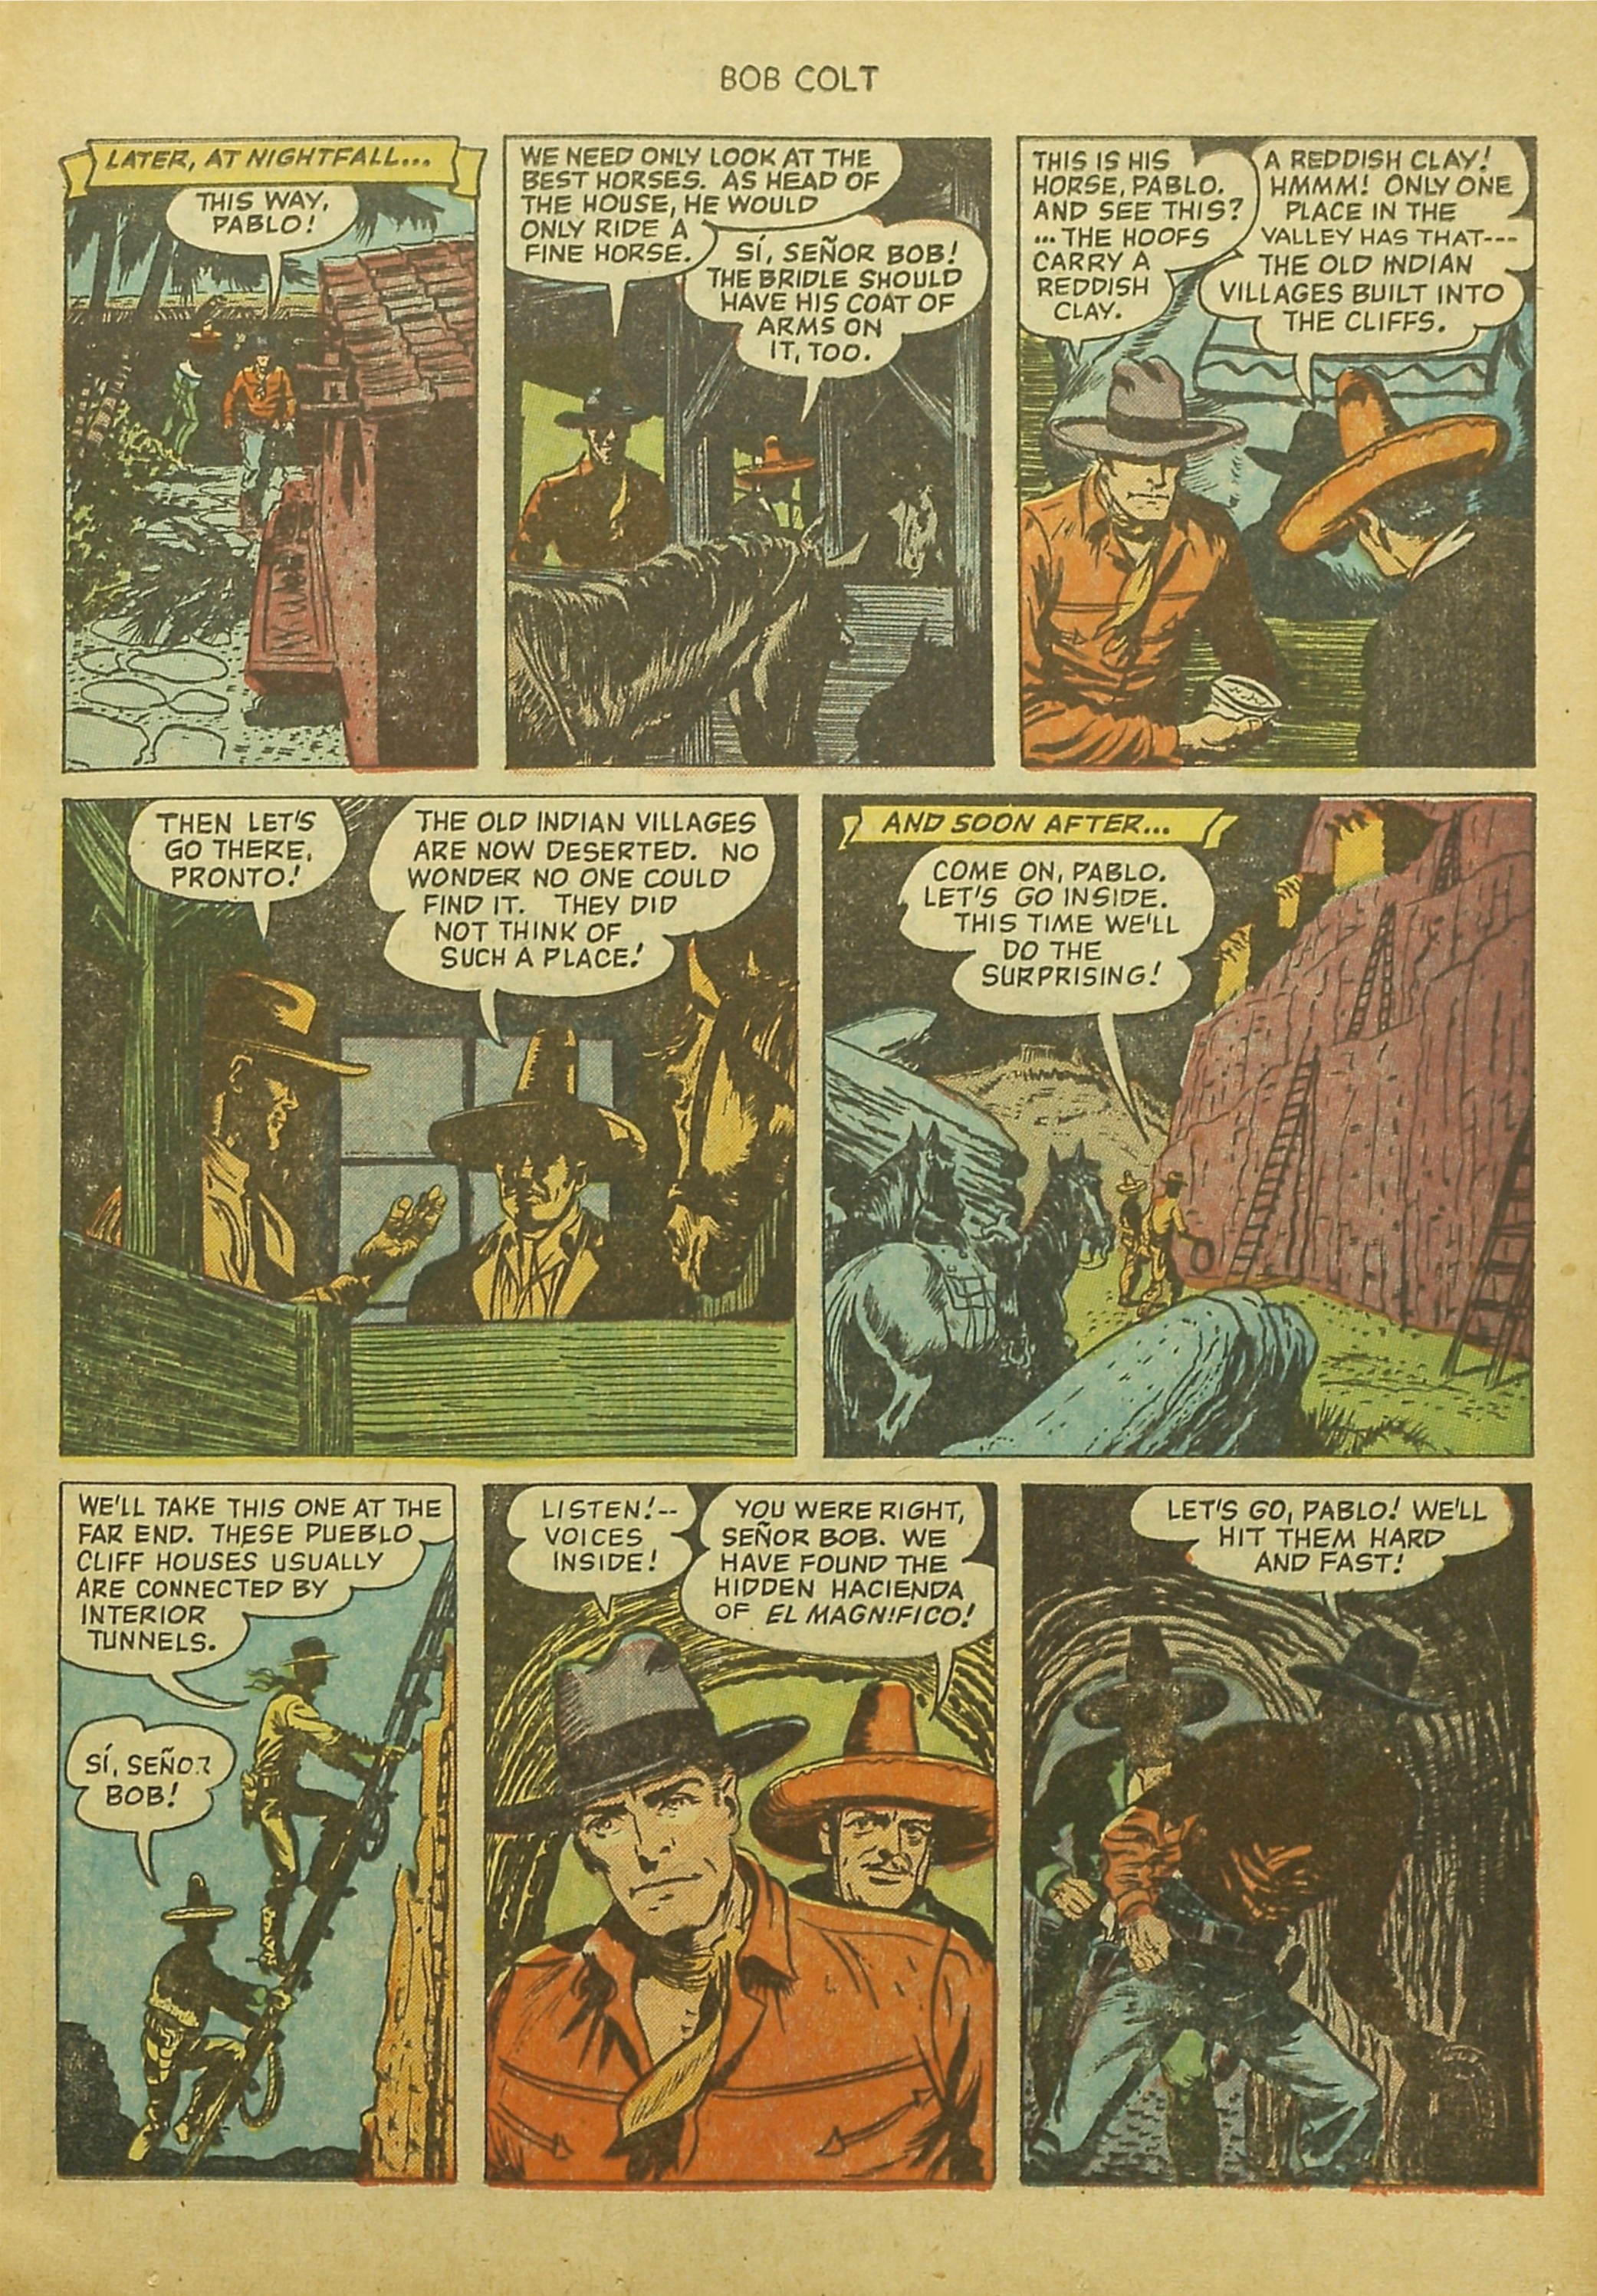 Read online Bob Colt Western comic -  Issue #9 - 13